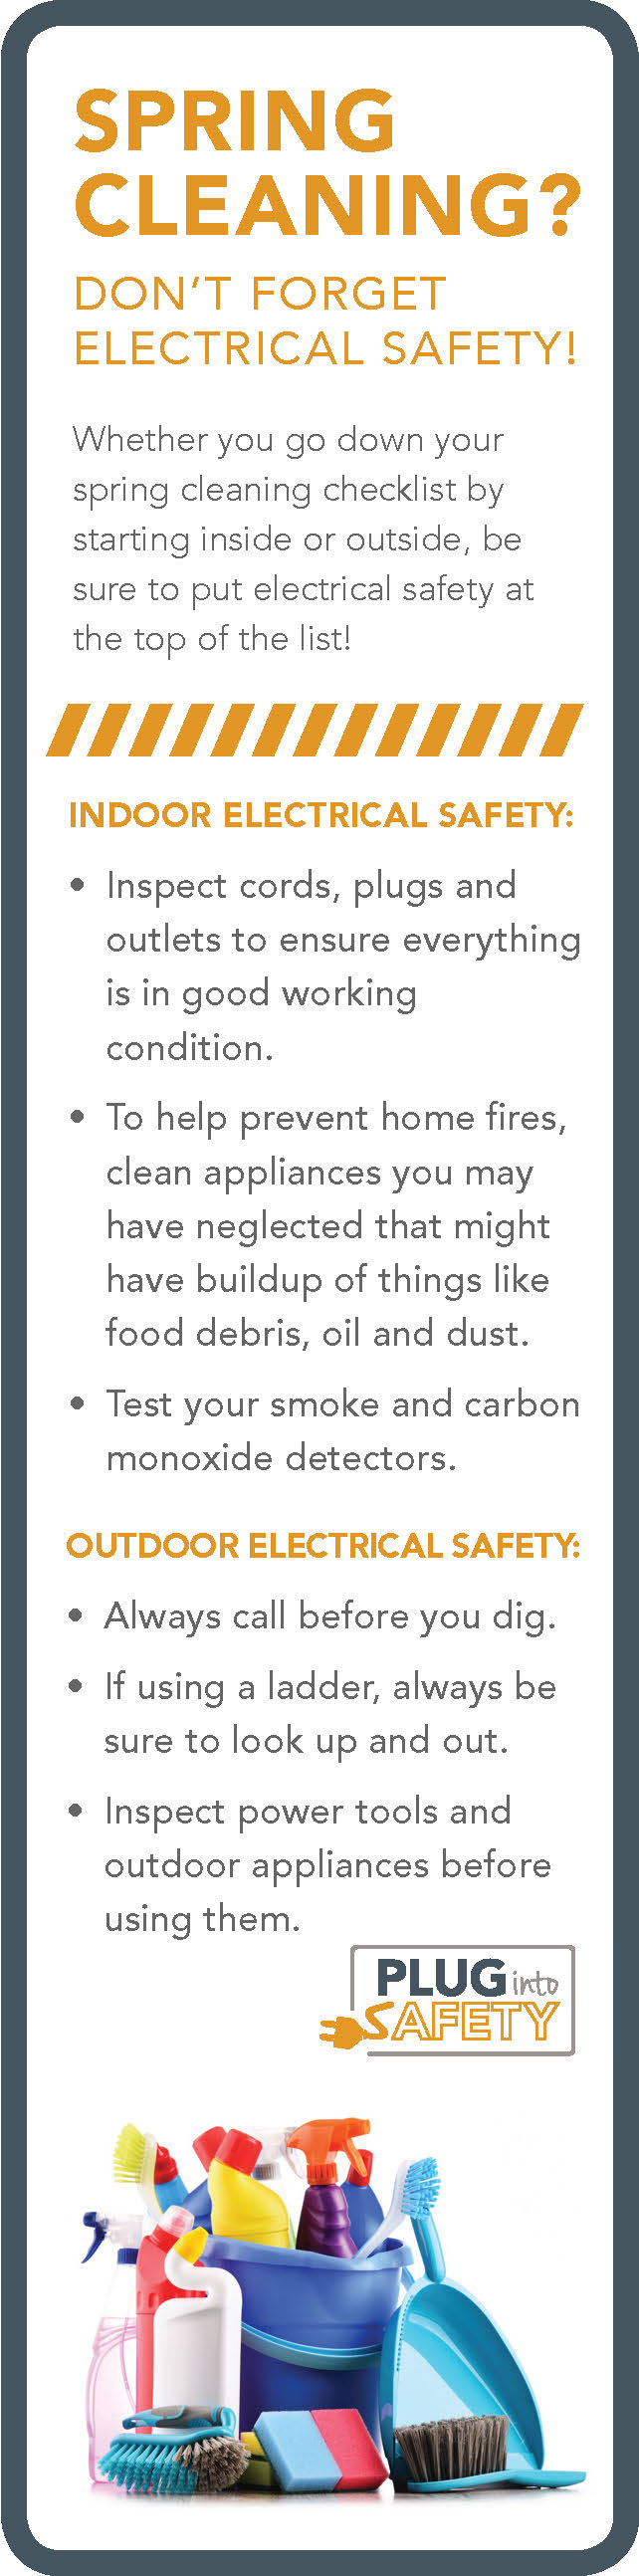 spring cleaning safety graphic